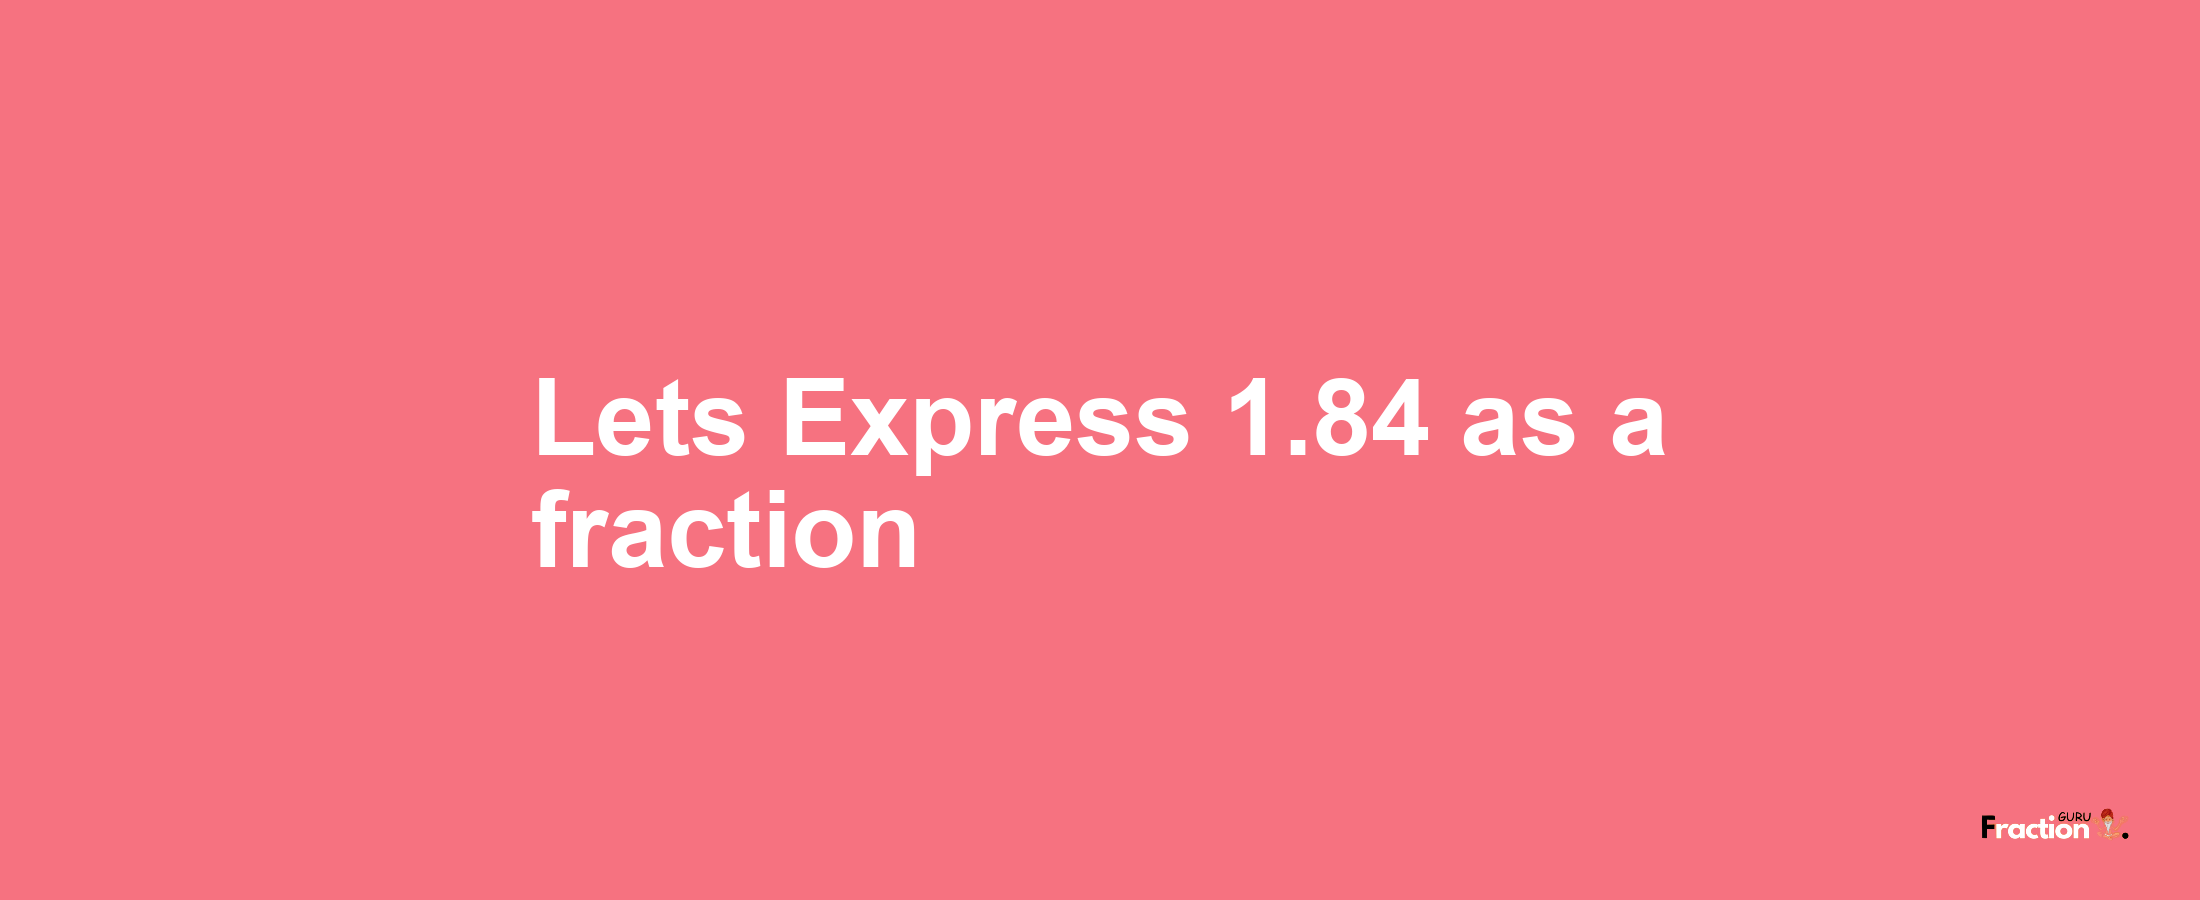 Lets Express 1.84 as afraction